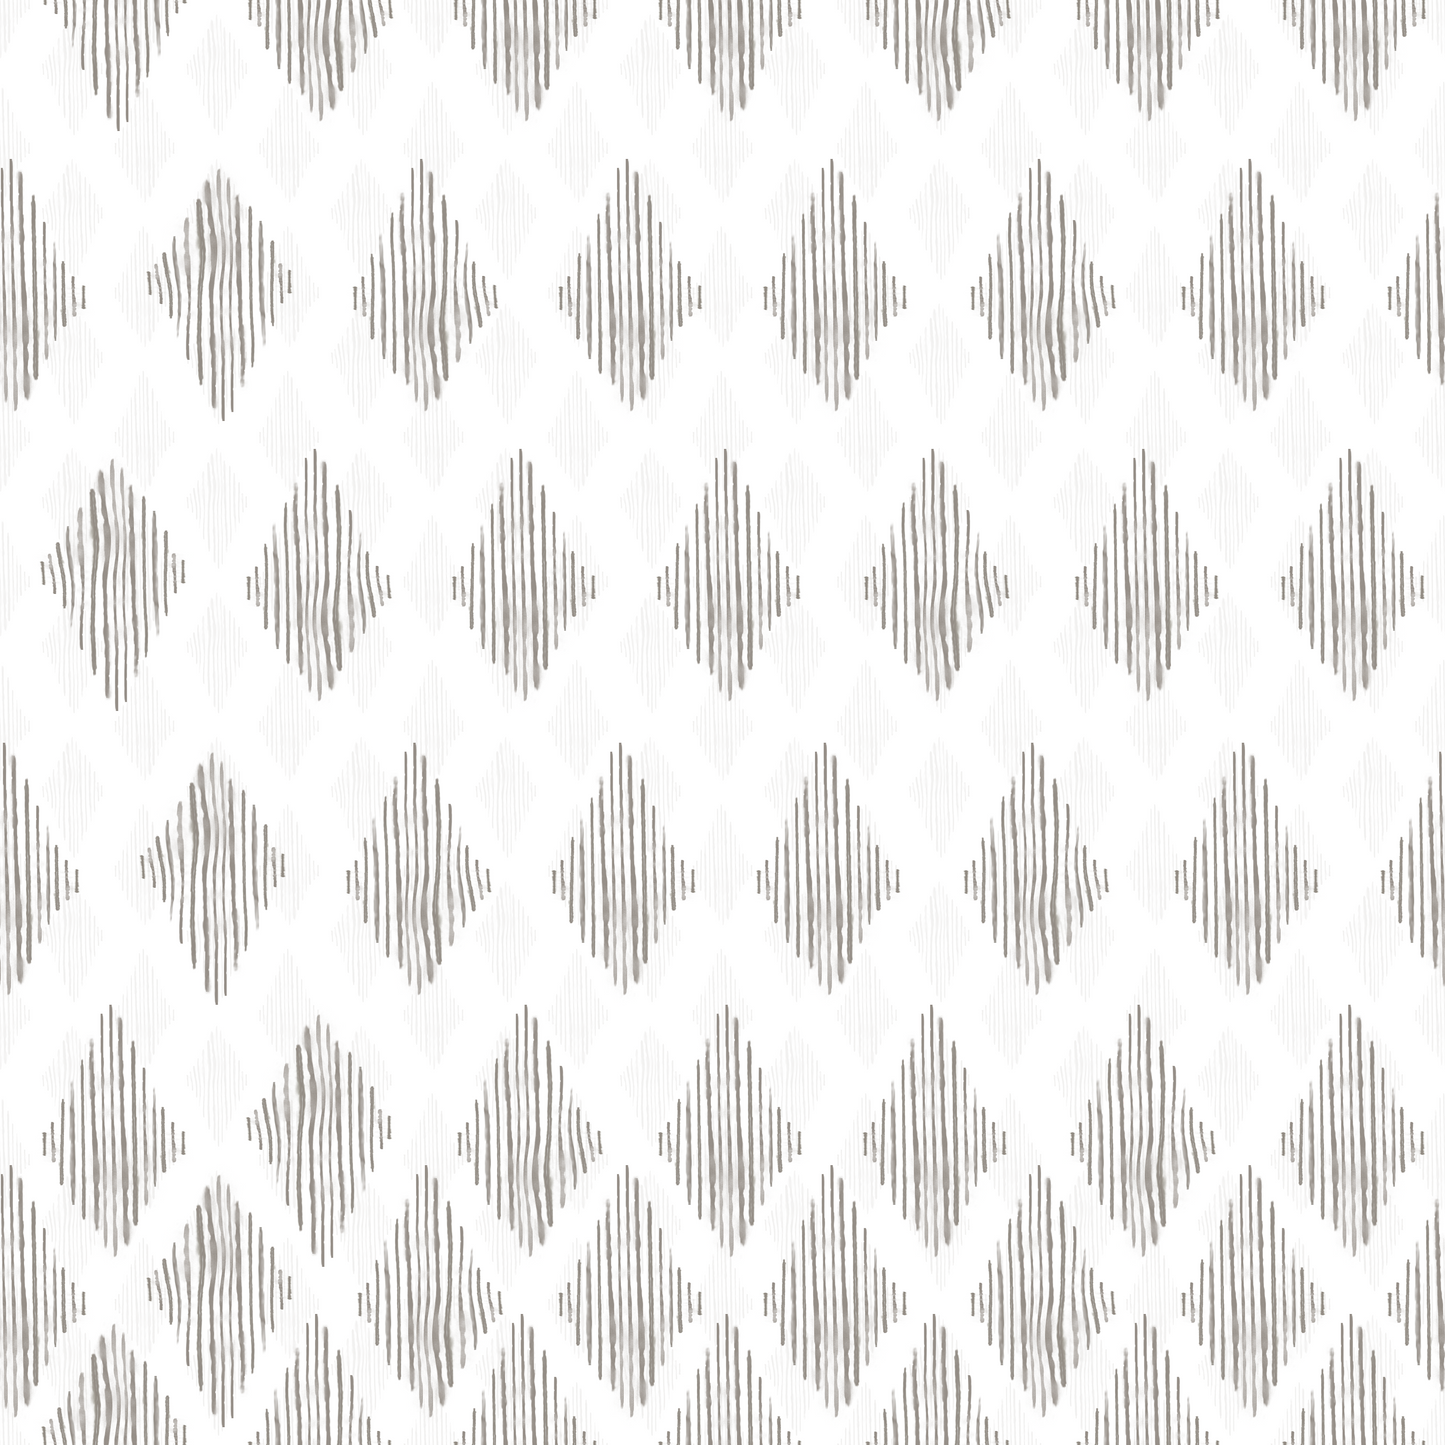 Grey/Gray large boho diamonds on white background easy to install and remove peel and stick custom wallpaper available in different lengths/sizes locally created and printed in Canada. Removable, washable, durable, commercial grade, customizable and water proof.